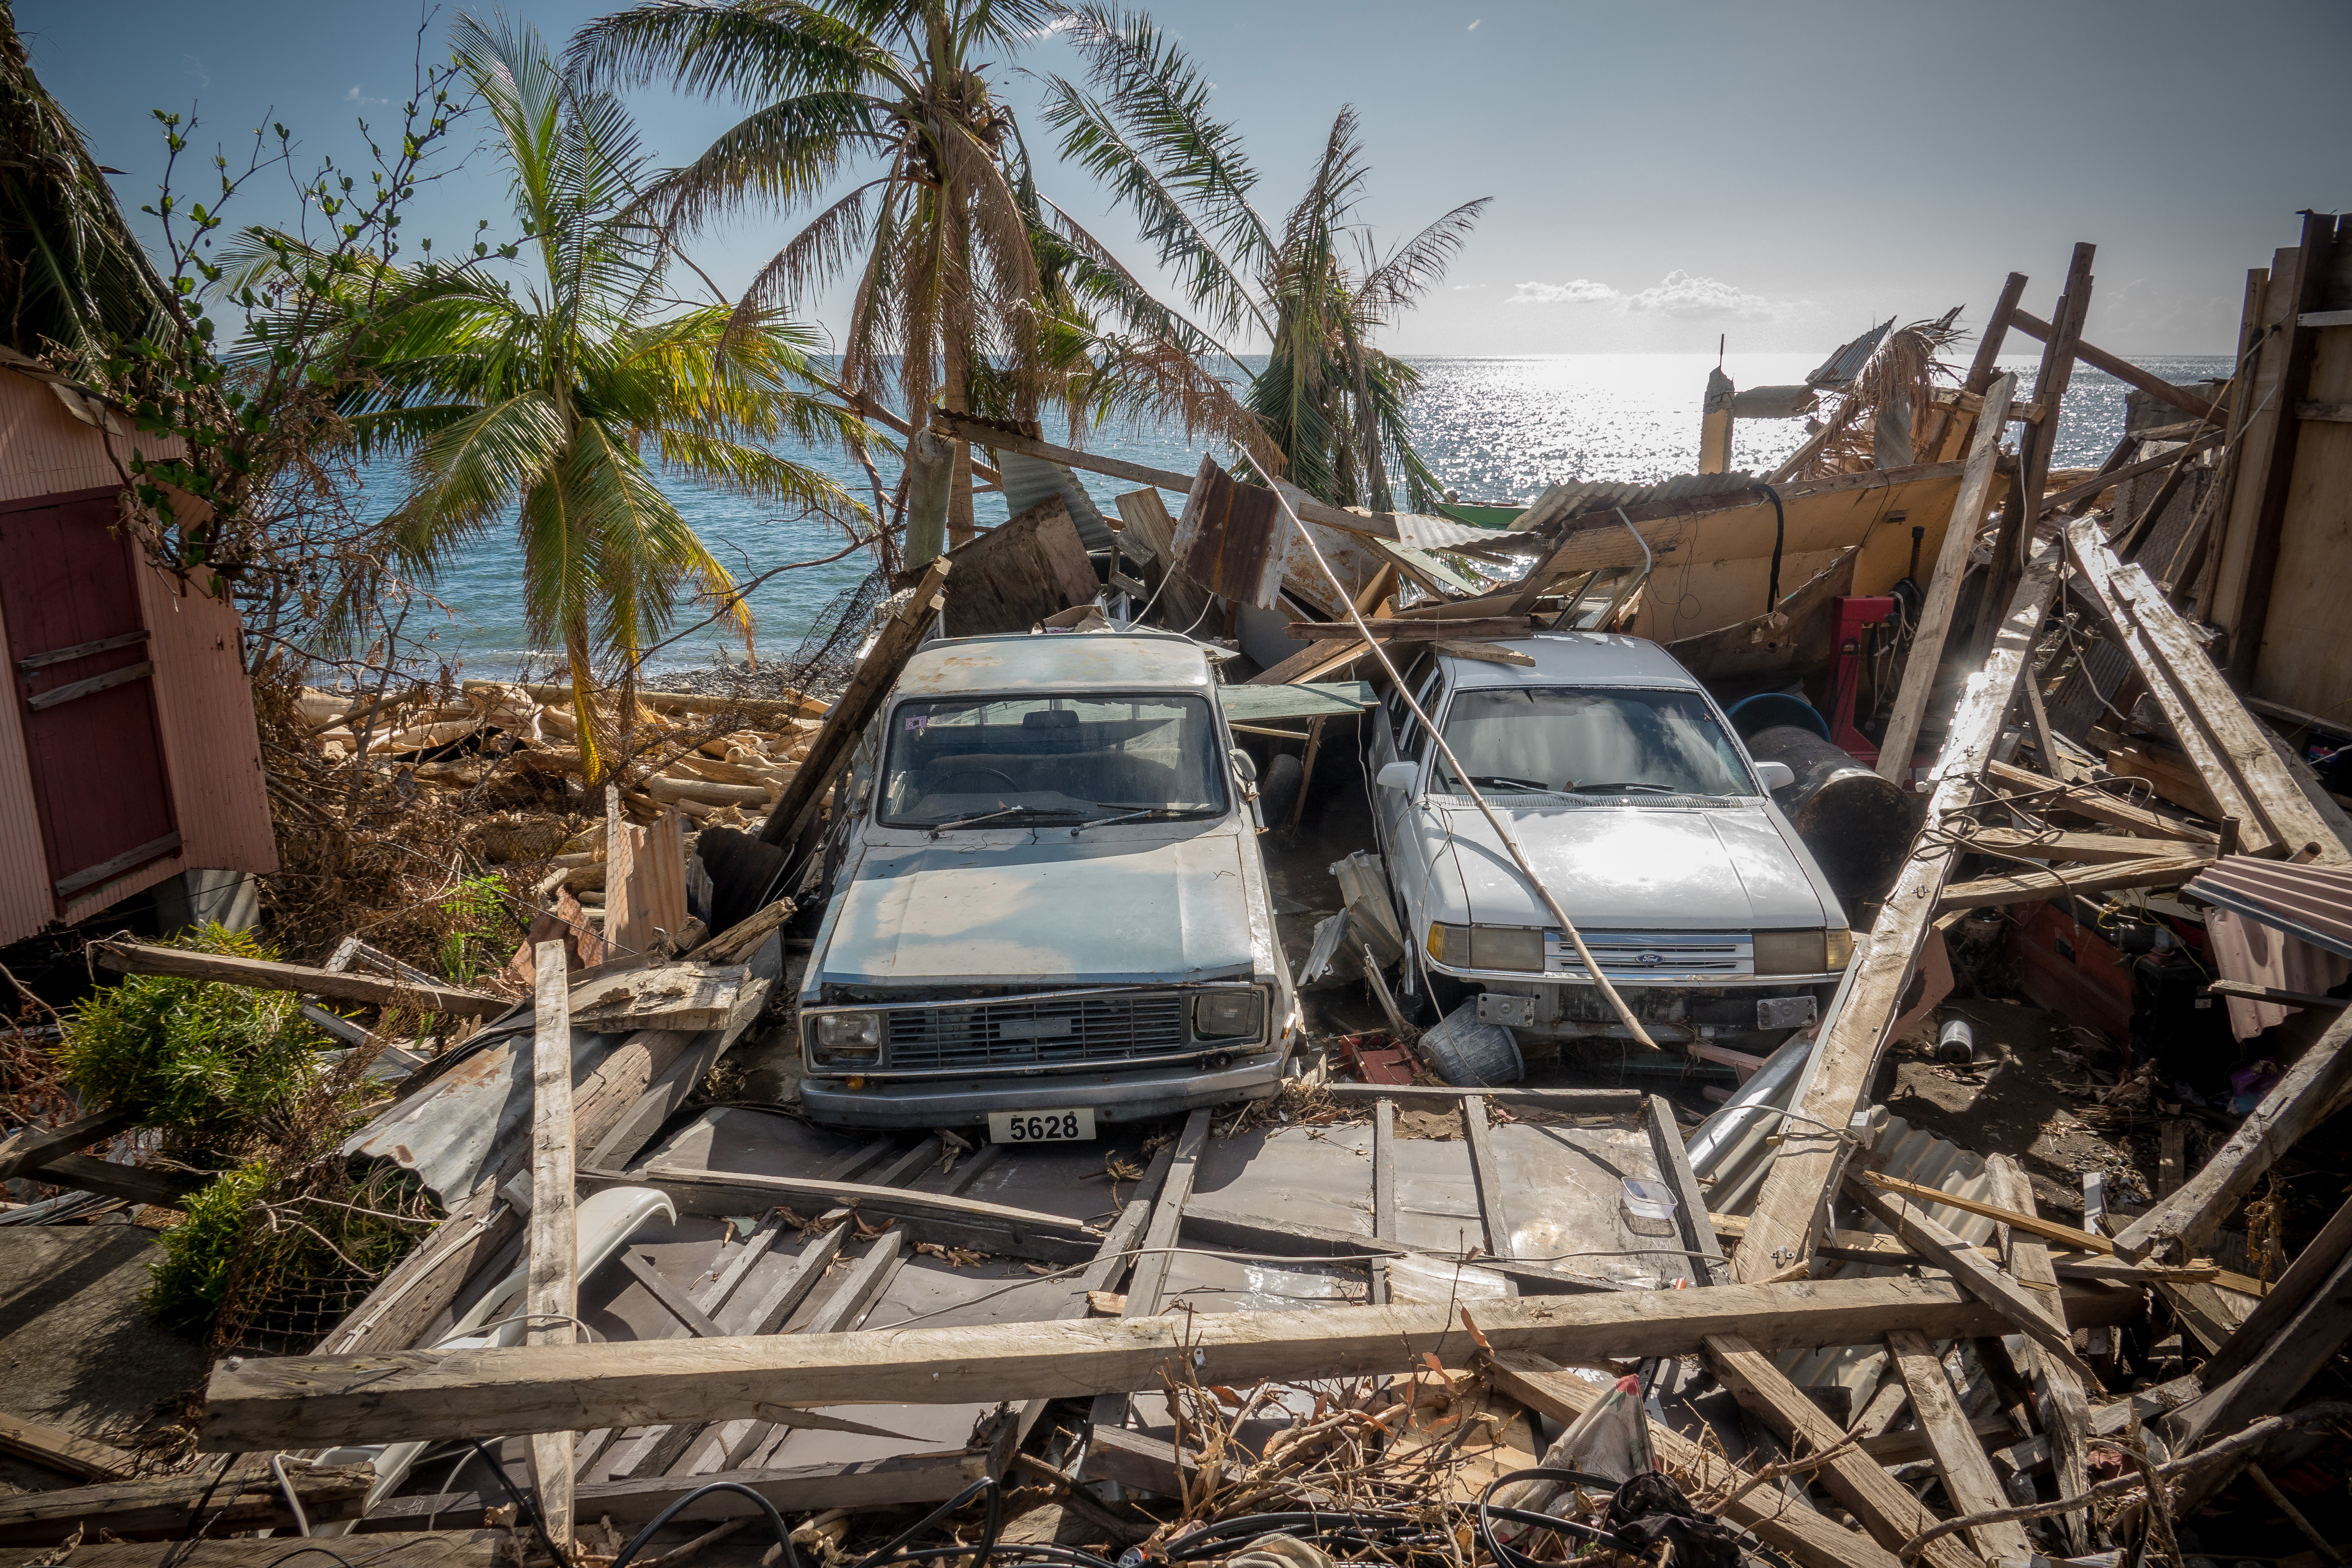 The hurricanes of 2017 devastated Dominica, an island nation in the Caribbean Sea. Photo courtesy of Global Medic.